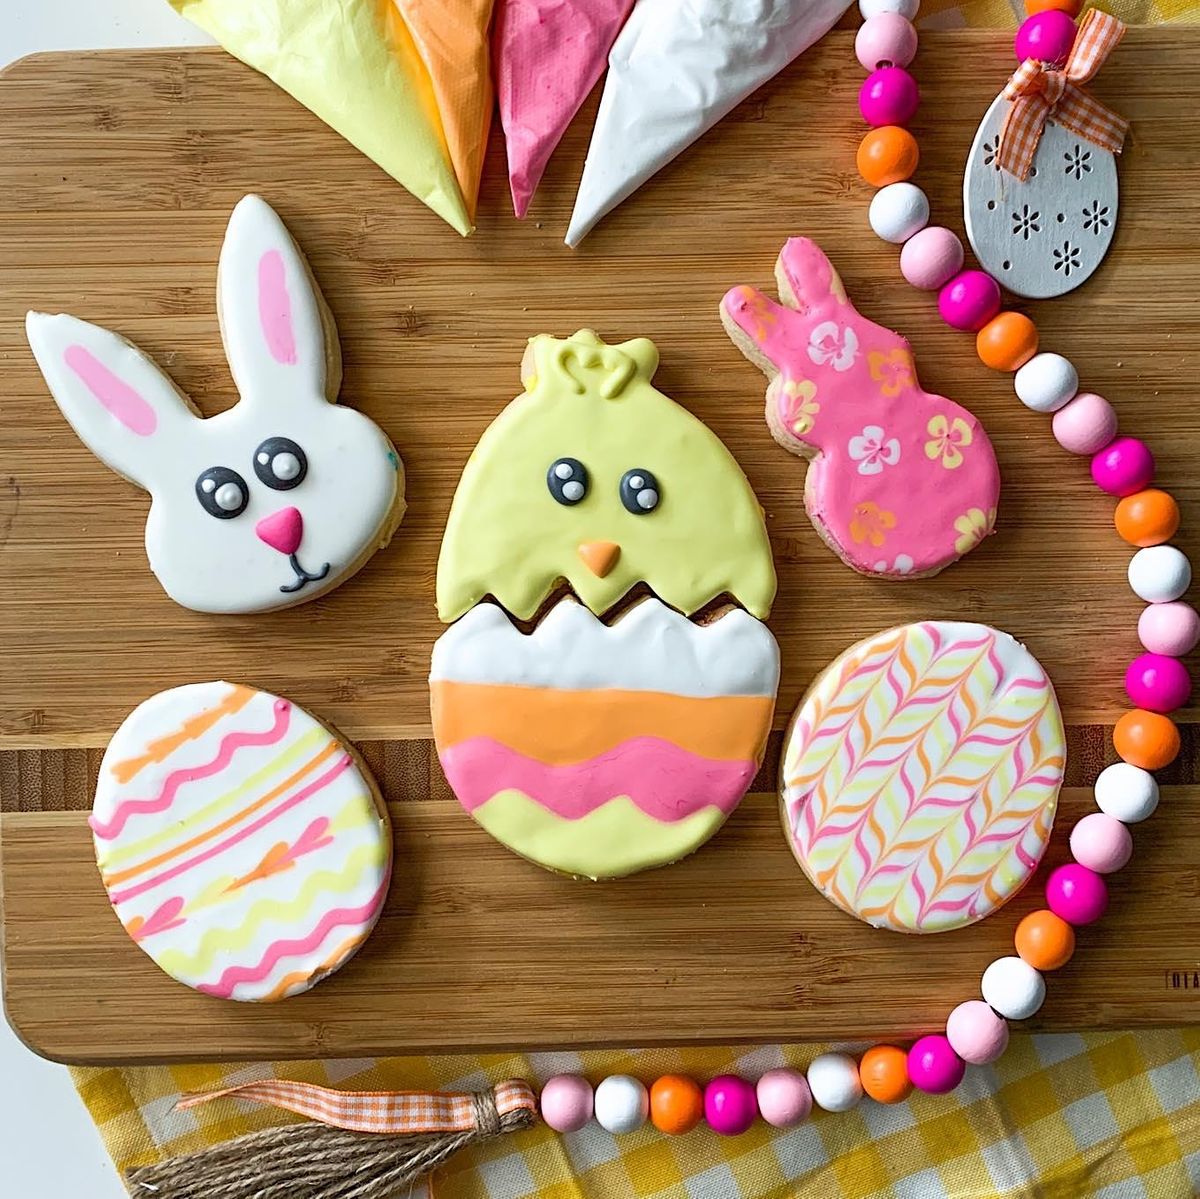 3pm Easter Sugar Cookie Decorating Class